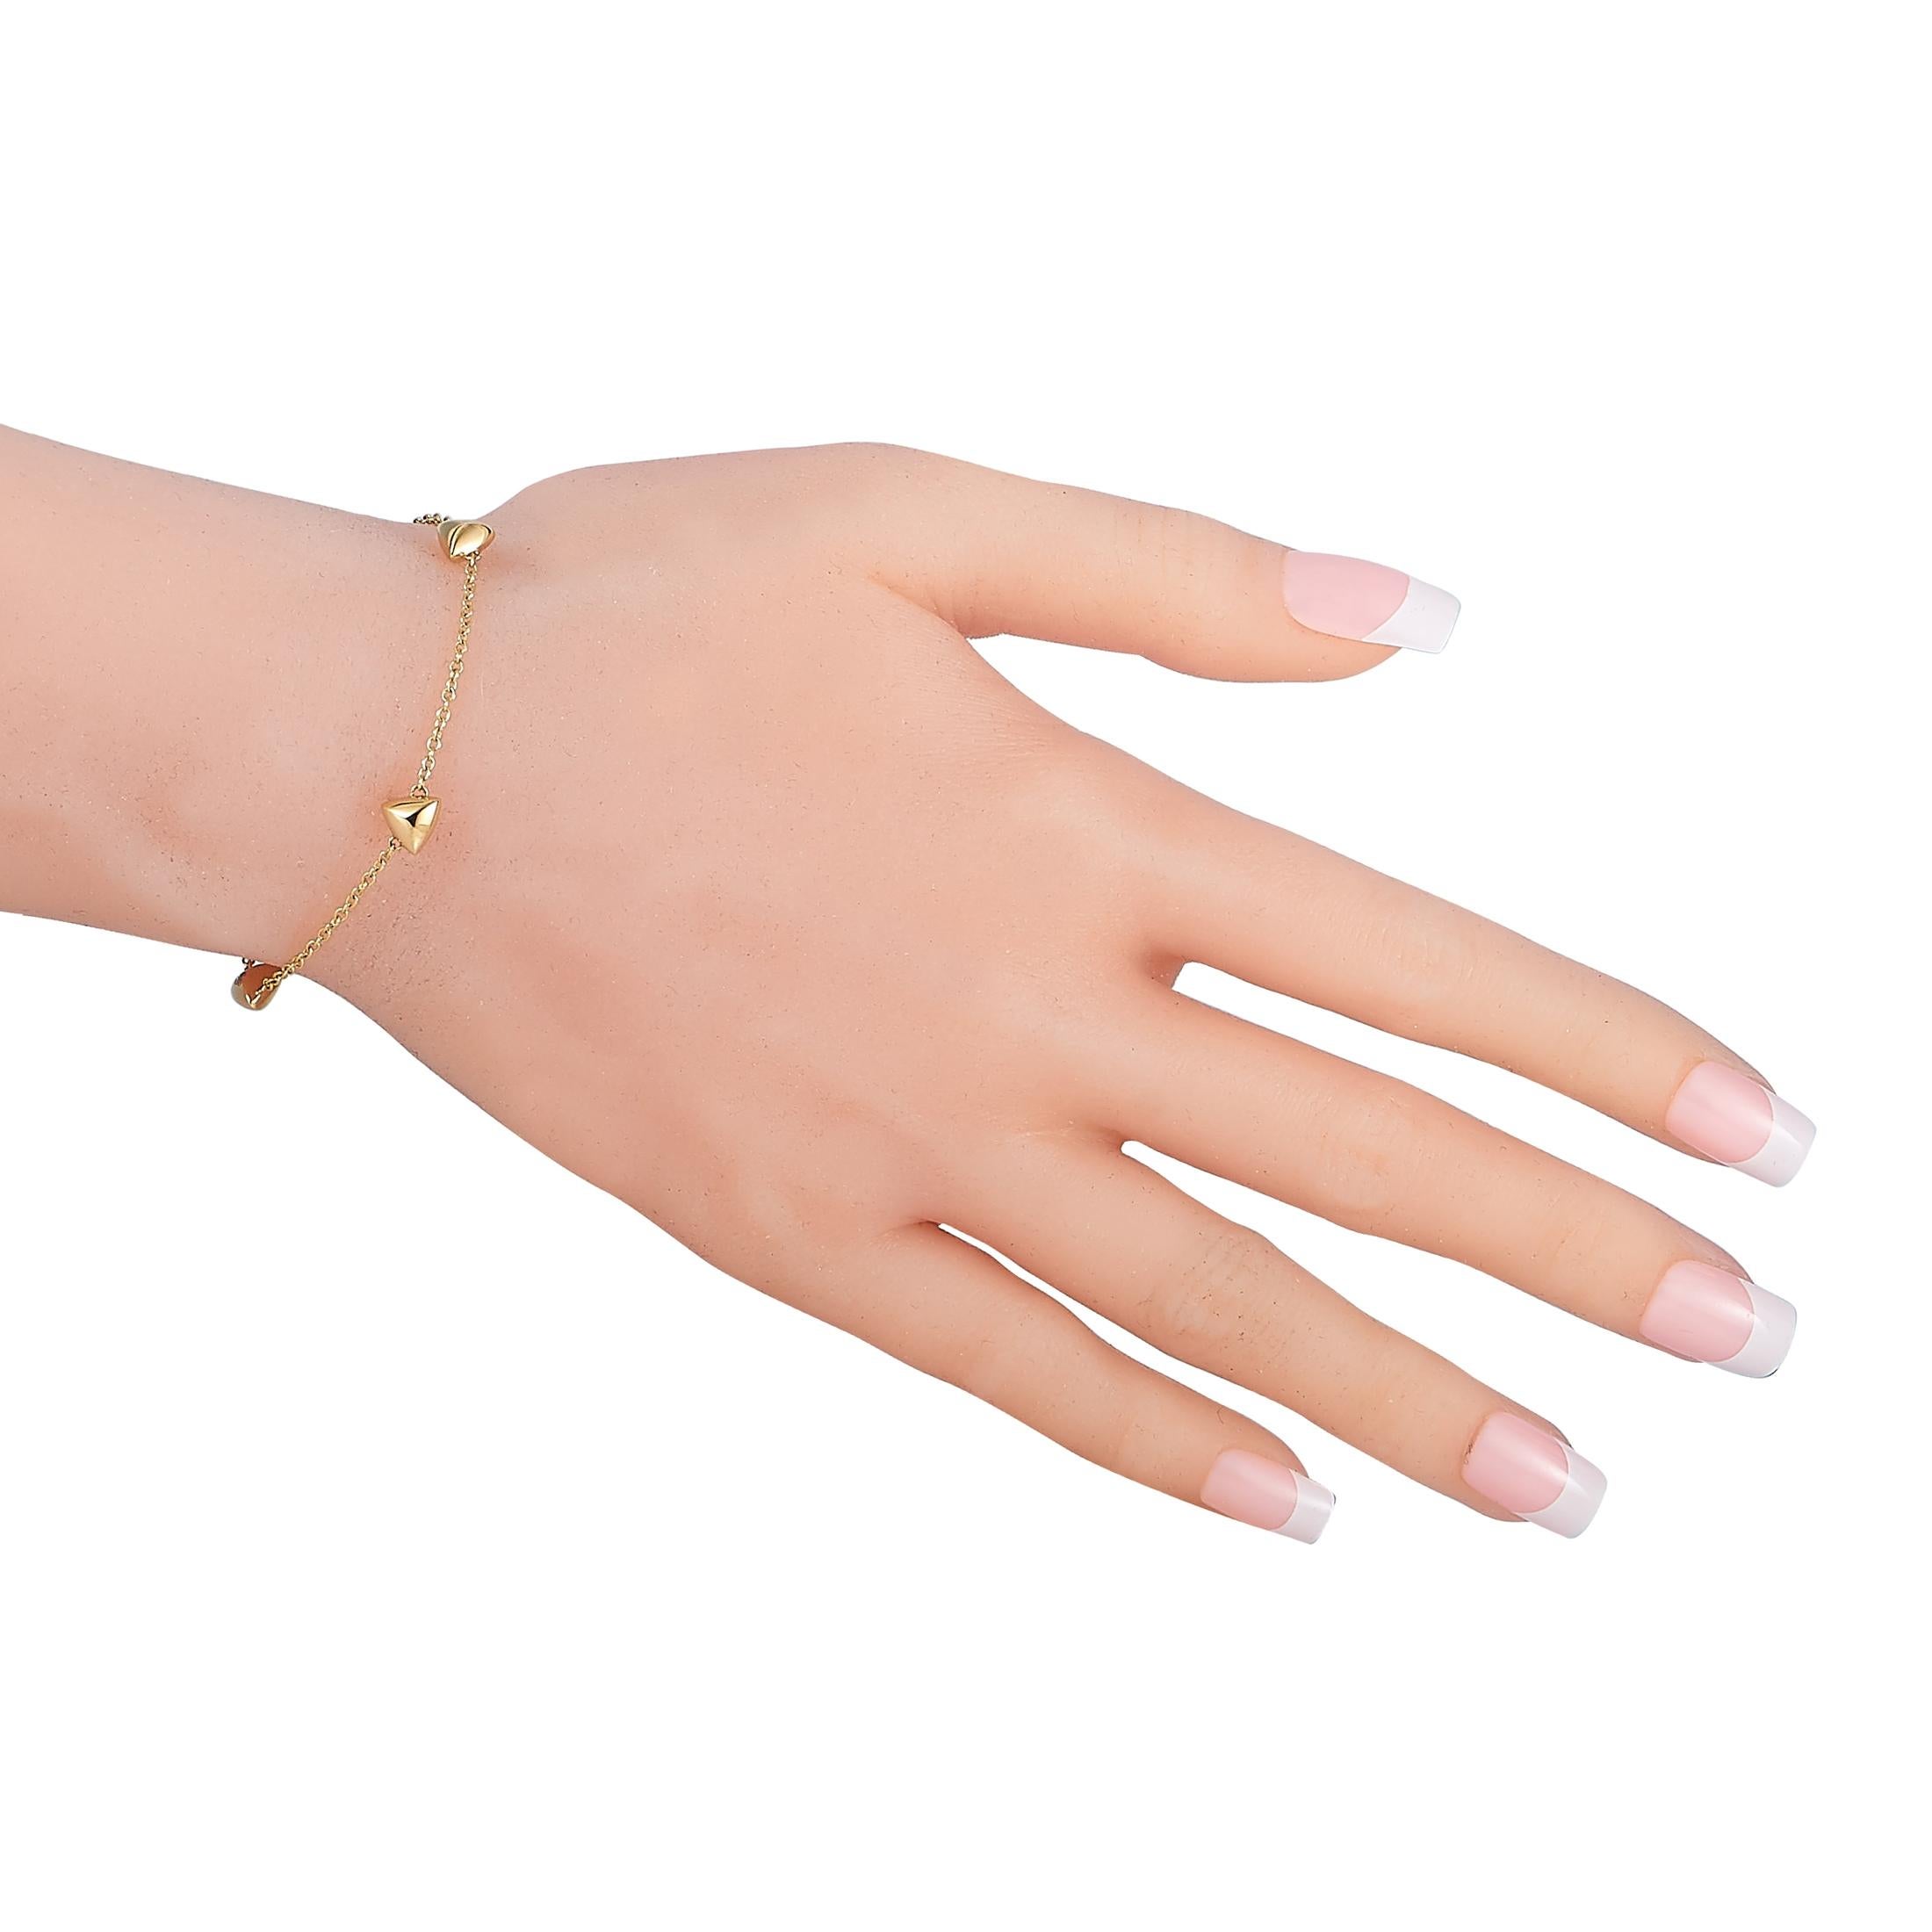 The Vhernier “Freccia Micro” bracelet is crafted from 18K rose gold and weighs 4.7 grams, measuring 6.50” in length.

This jewelry piece is offered in brand new condition and includes the manufacturer’s box.